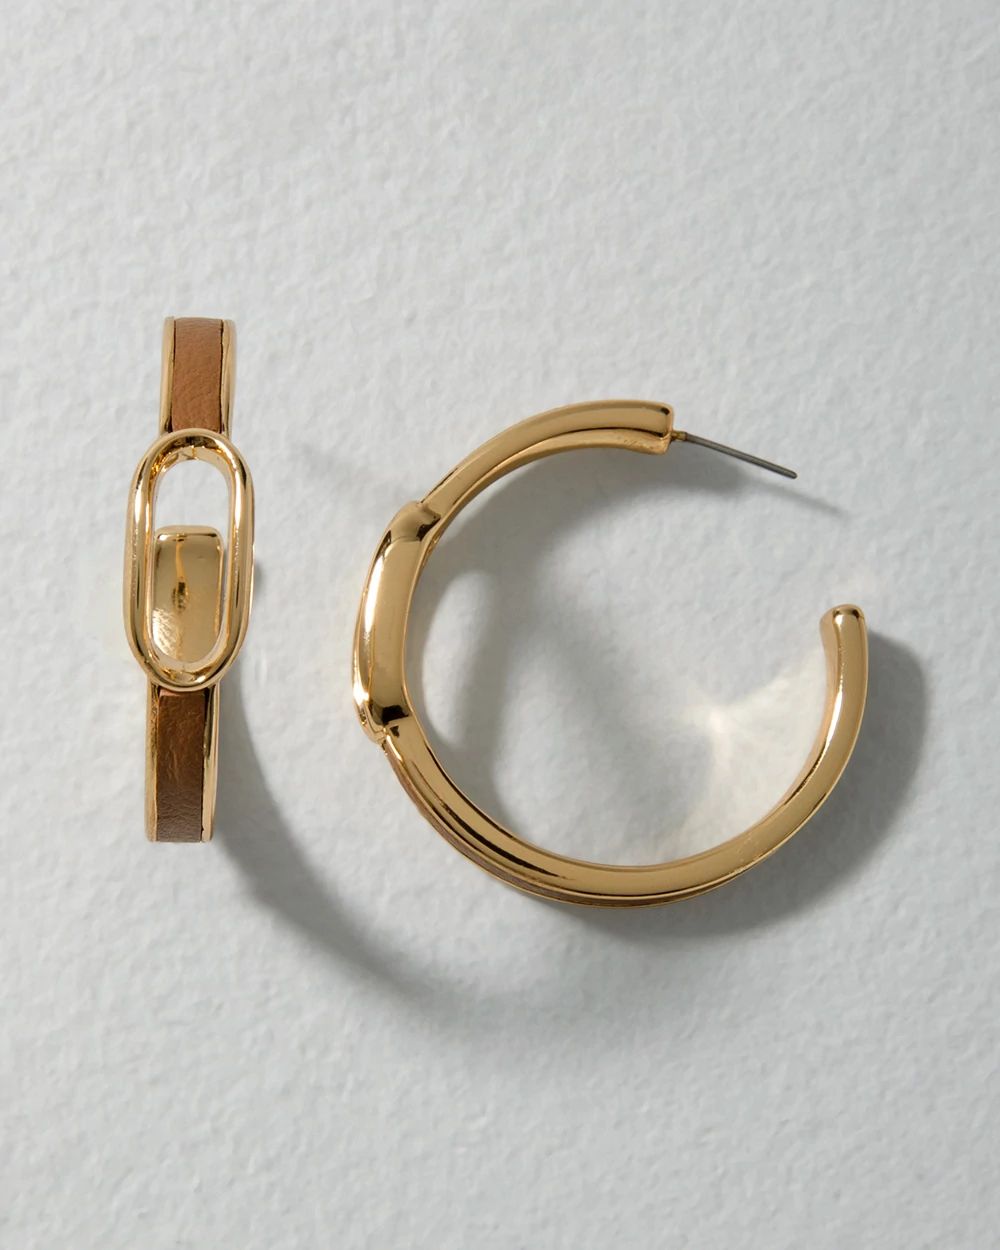 Goldtone + Leather Hoop Earrings click to view larger image.